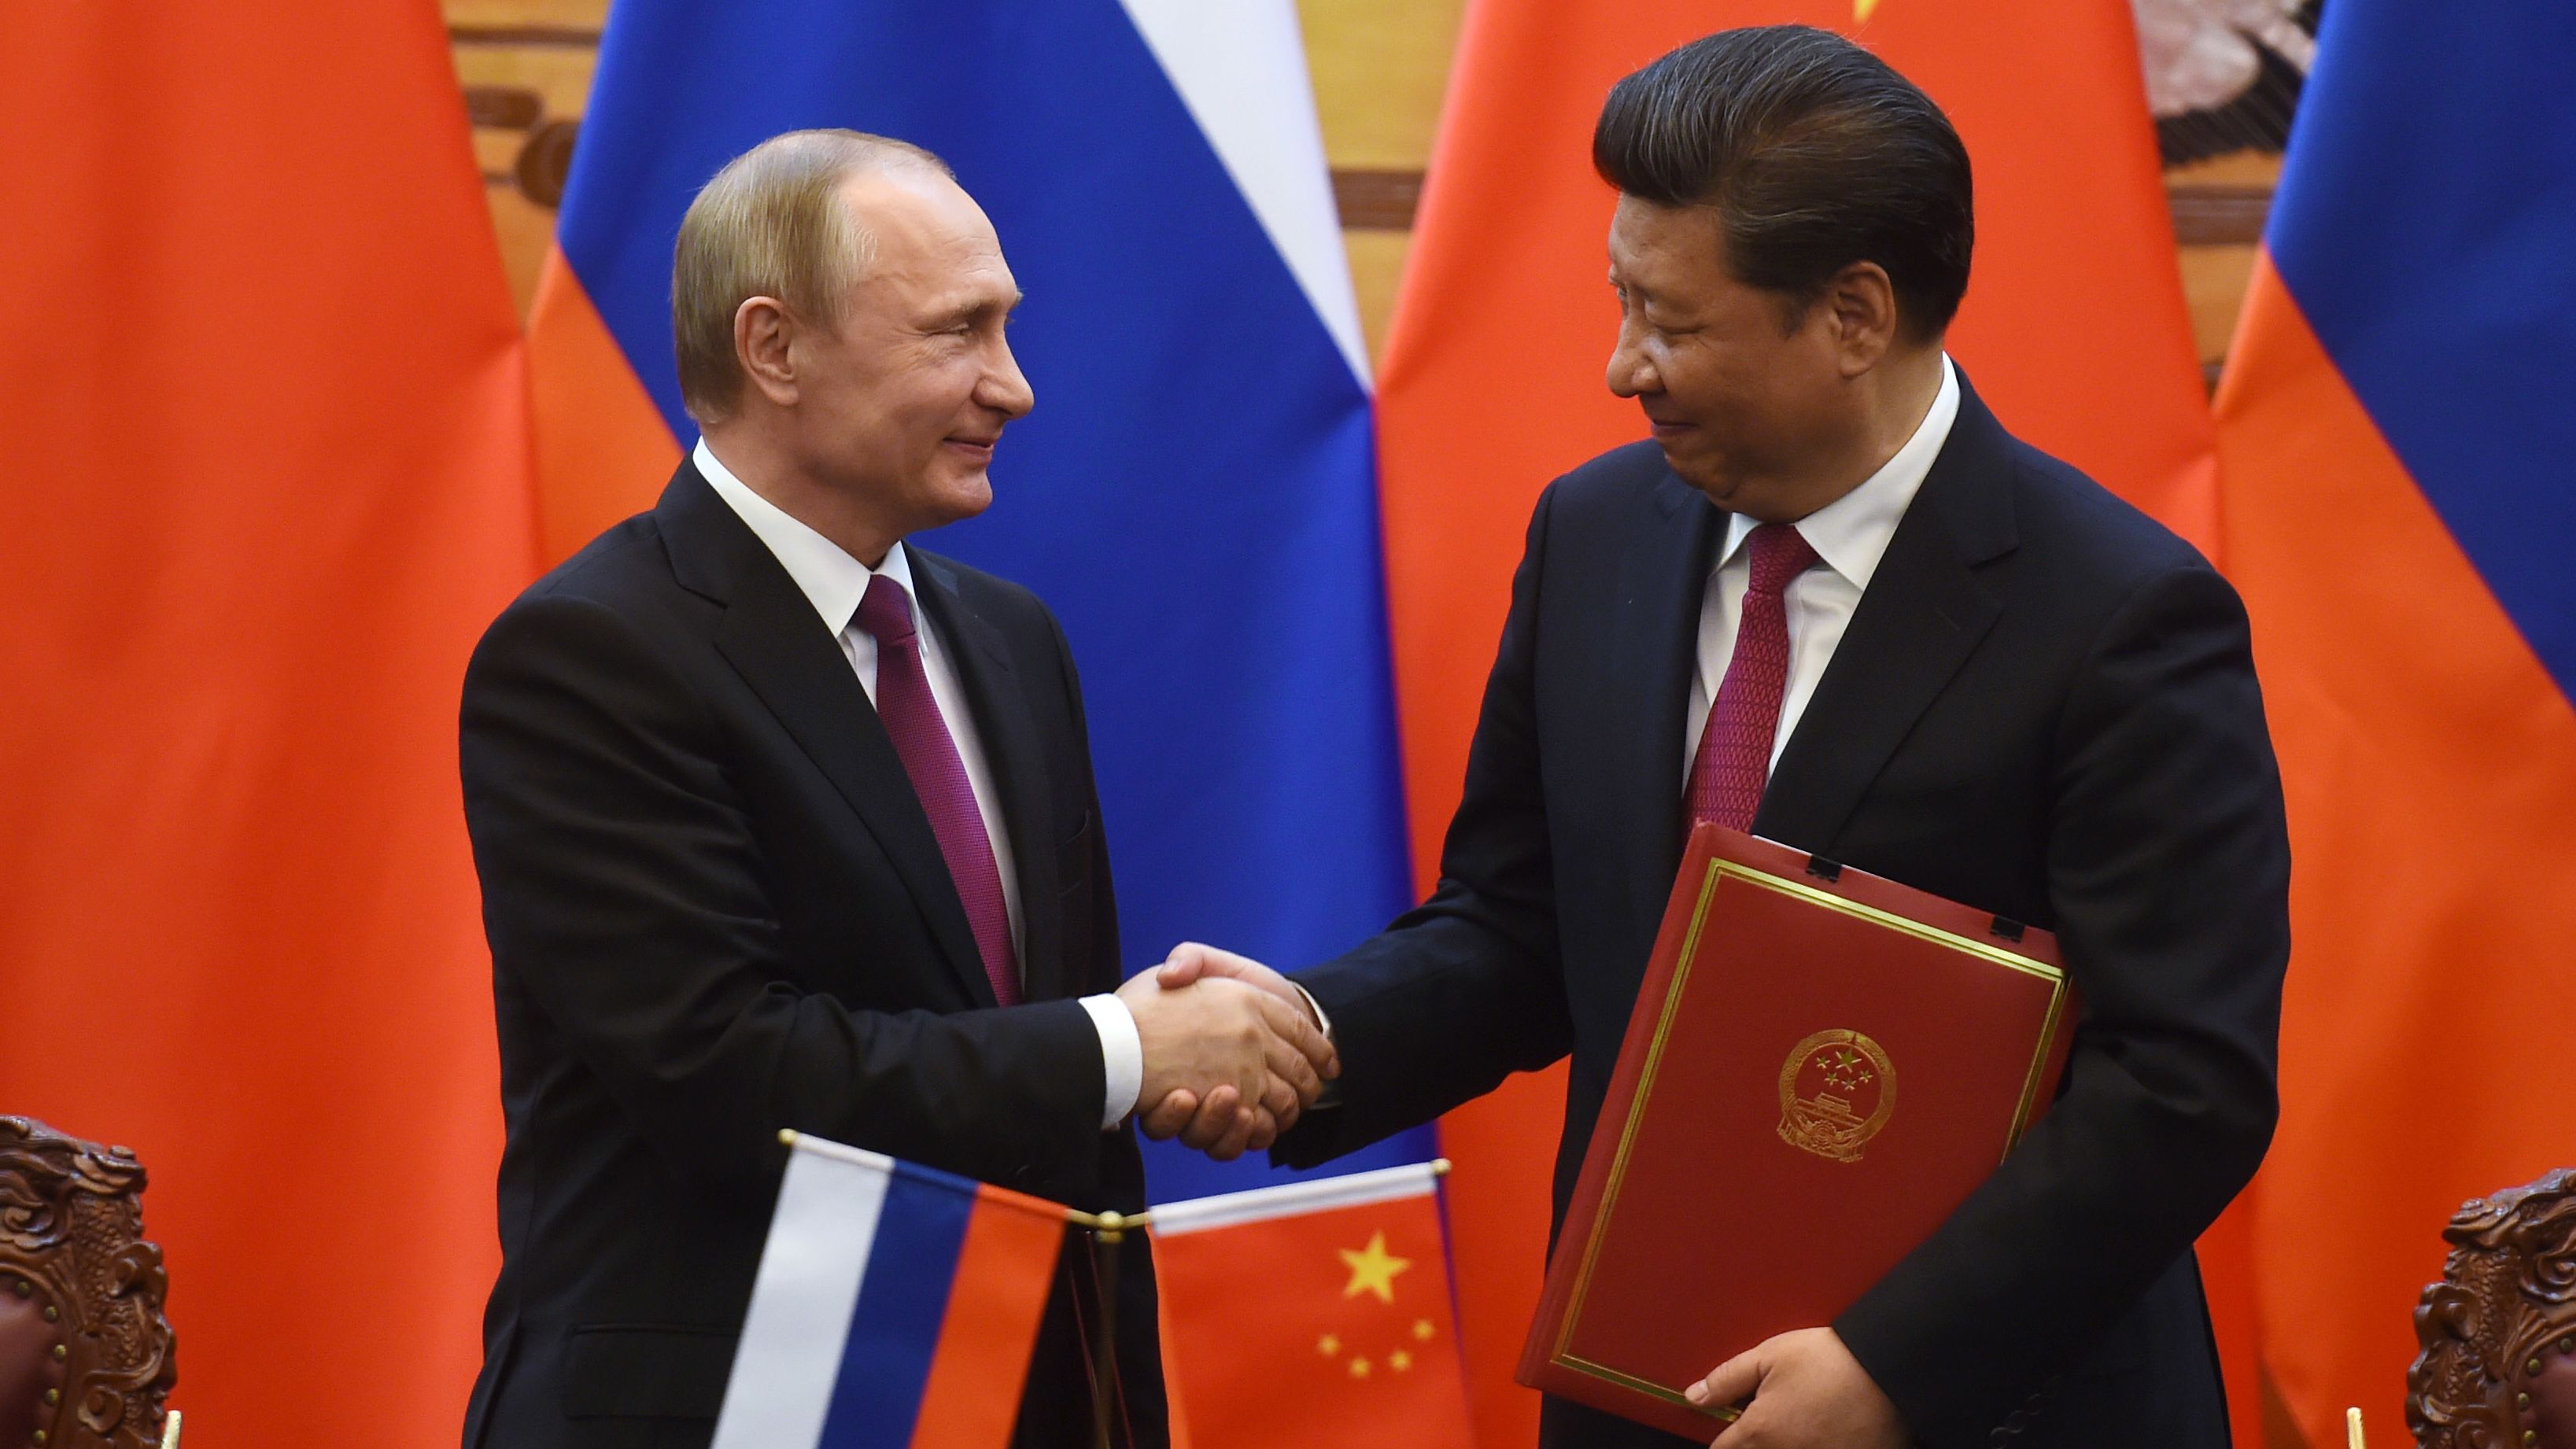 Russian President Vladimir Putin (L) shakes hands with Chinese President Xi Jinping during a signing ceremony in Beijing's Great Hall of the People on June 25, 2016 in Beijing, China. 